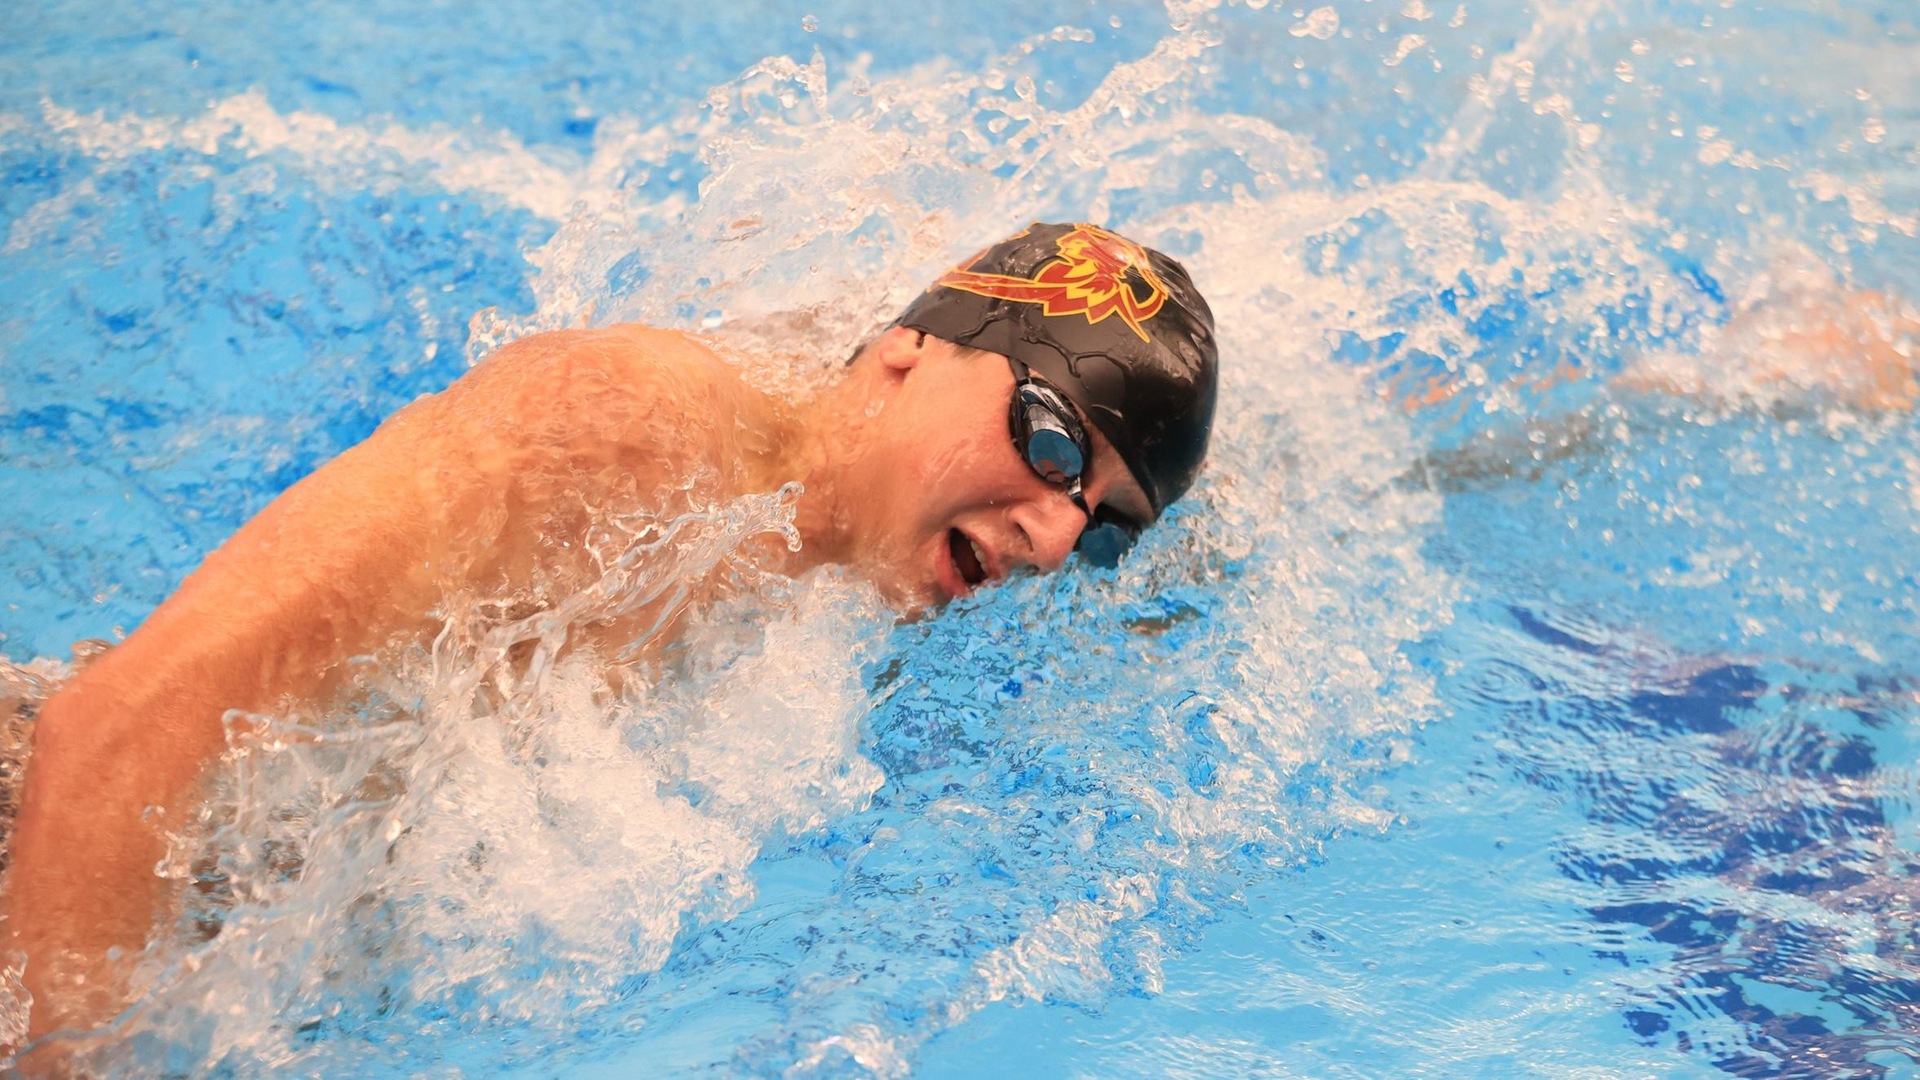 Lucas Lang finished 11th with a 4;26.24 in the 500 (photo by Carlos Morales)